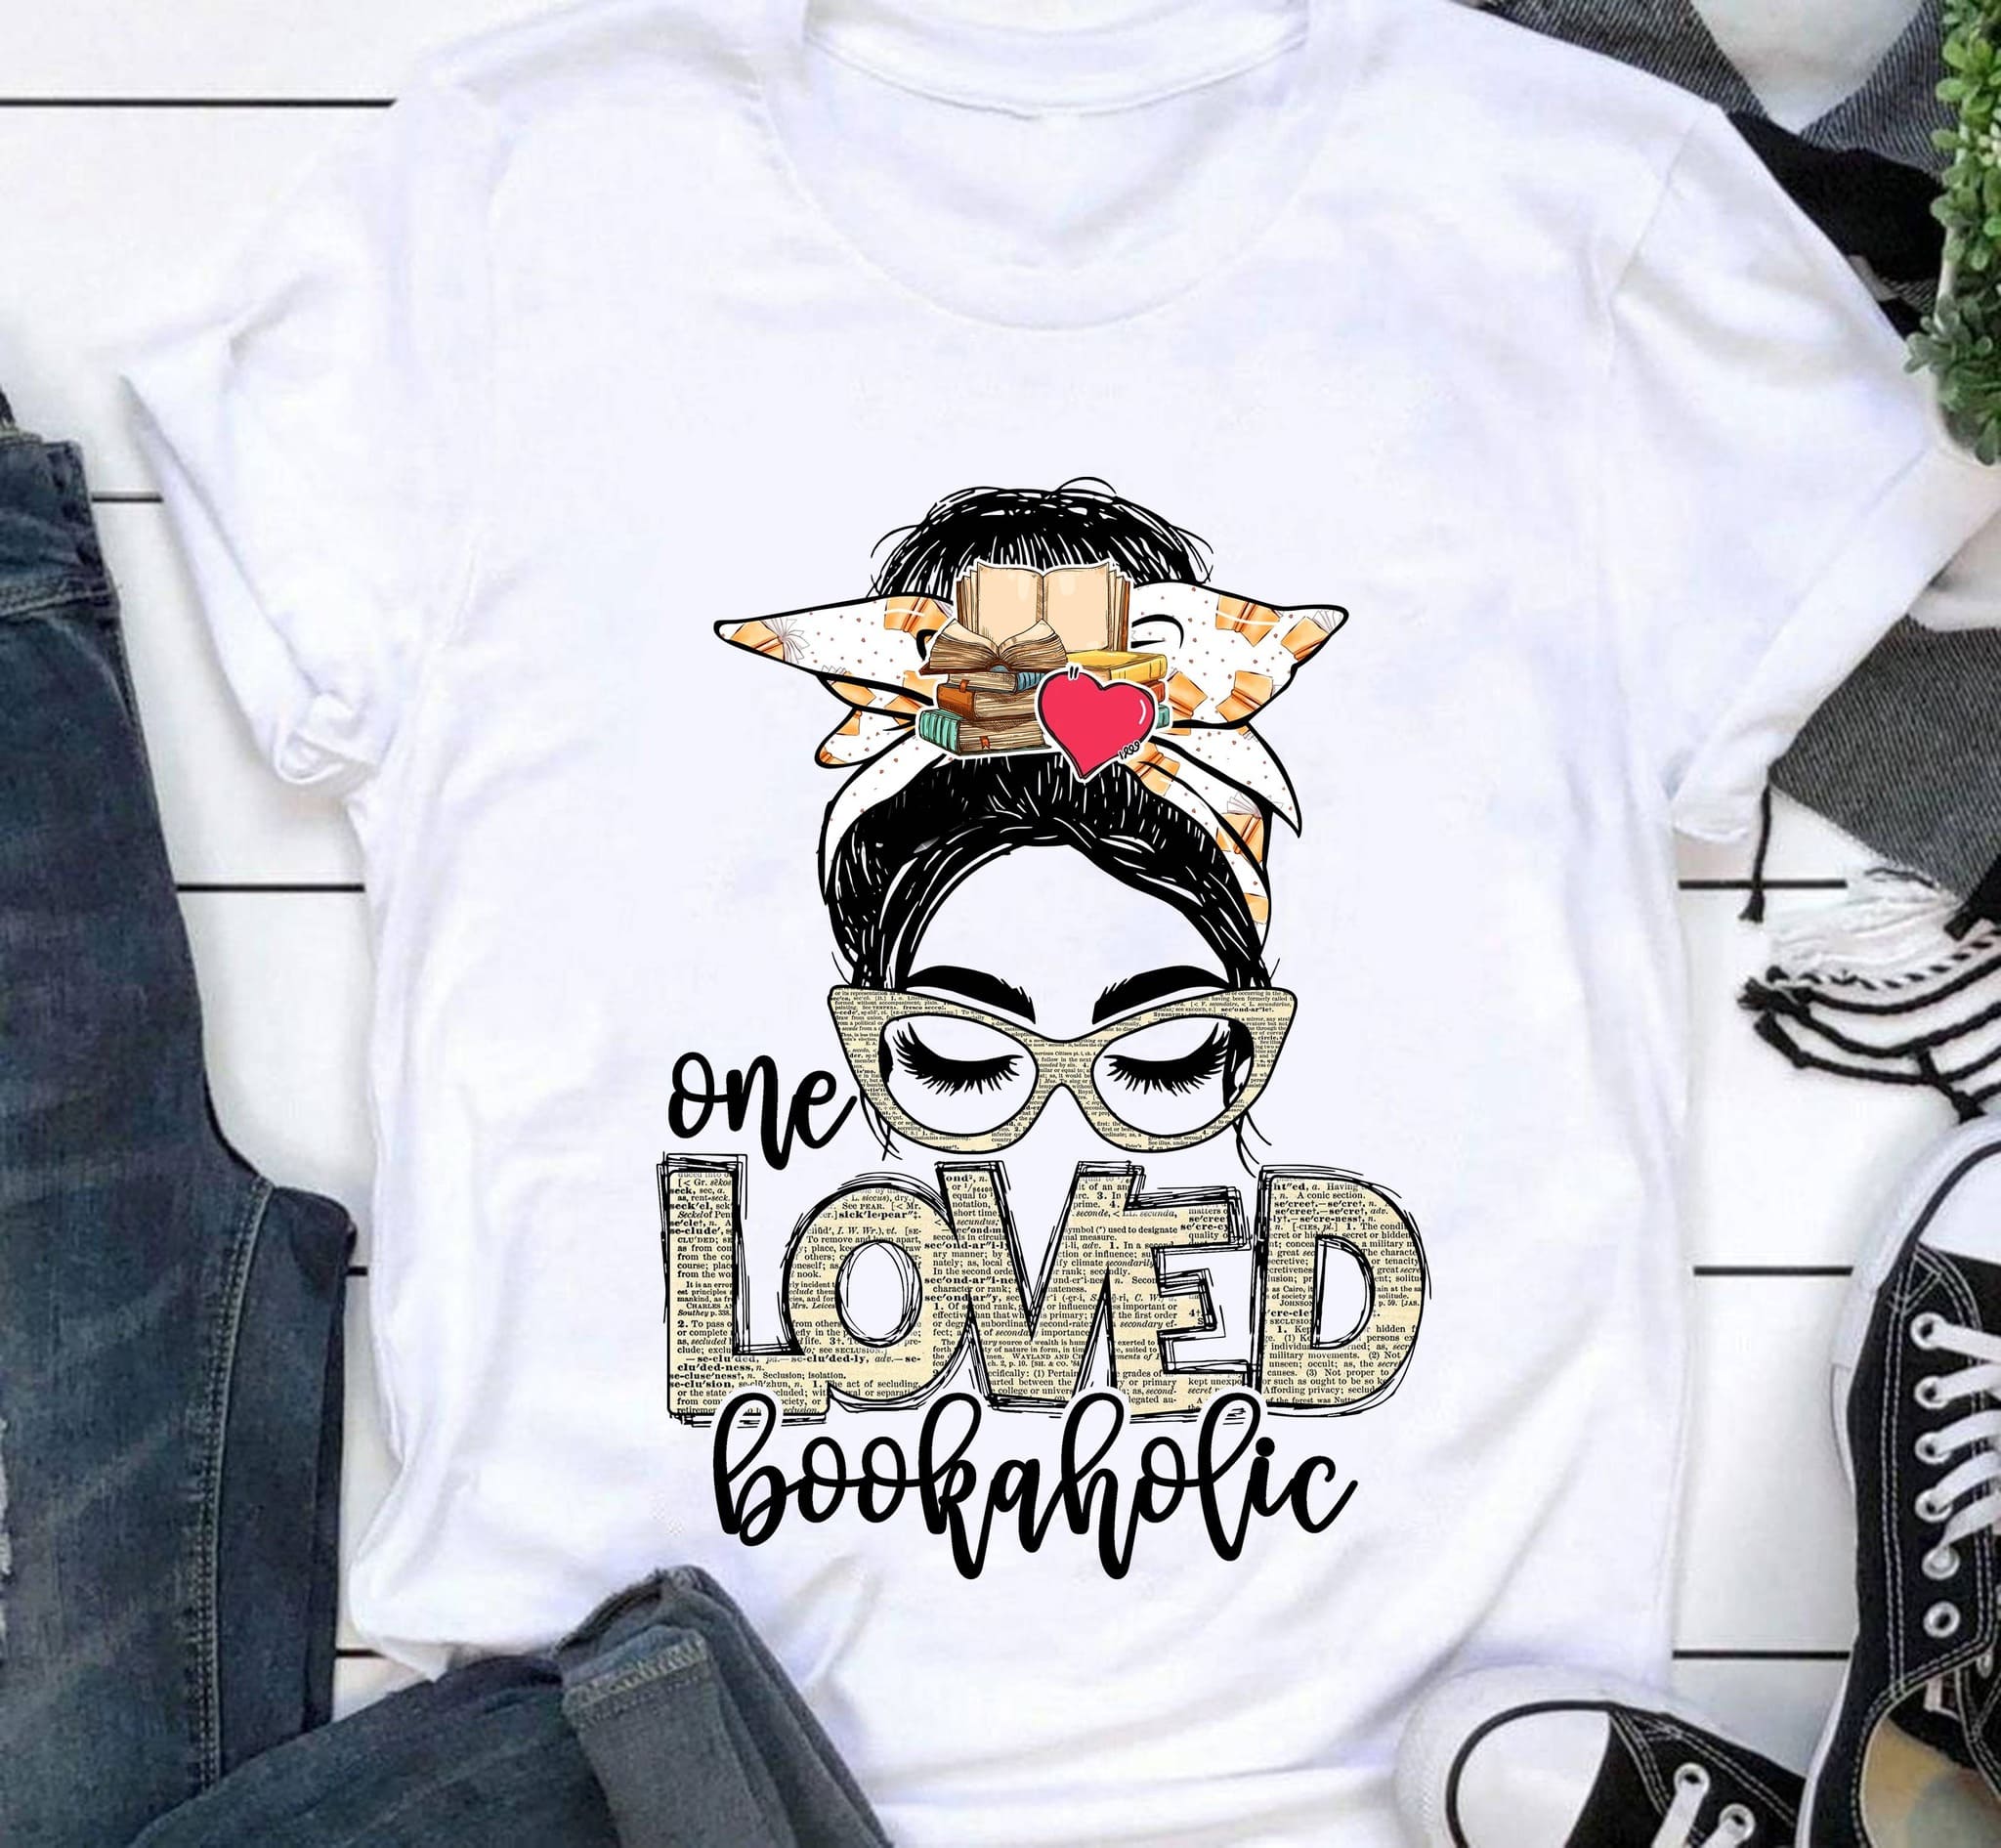 One loved bookaholic - Girl the book lover, T-shirt for bookaholic